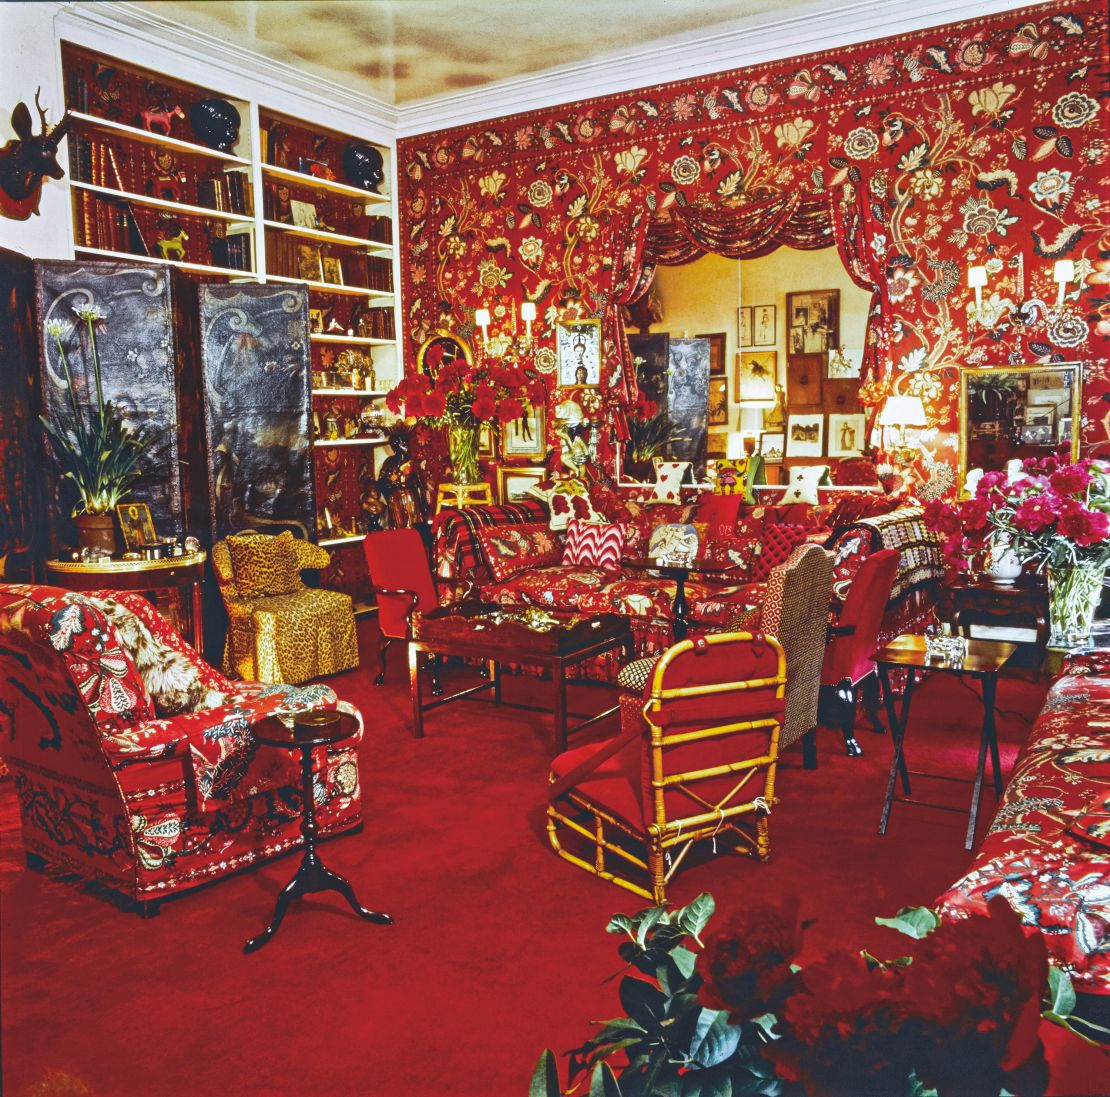 Living room in the Manhattan apartment of fashion editor Diana Vreeland, designed by Billy Baldwin, with dramatic red floral fabric on the walls and as upholstery on the furniture. A painted leather screen rests in front of the bookshelves and there are multiple throw pillows on the couch and a chair covered in leopard.